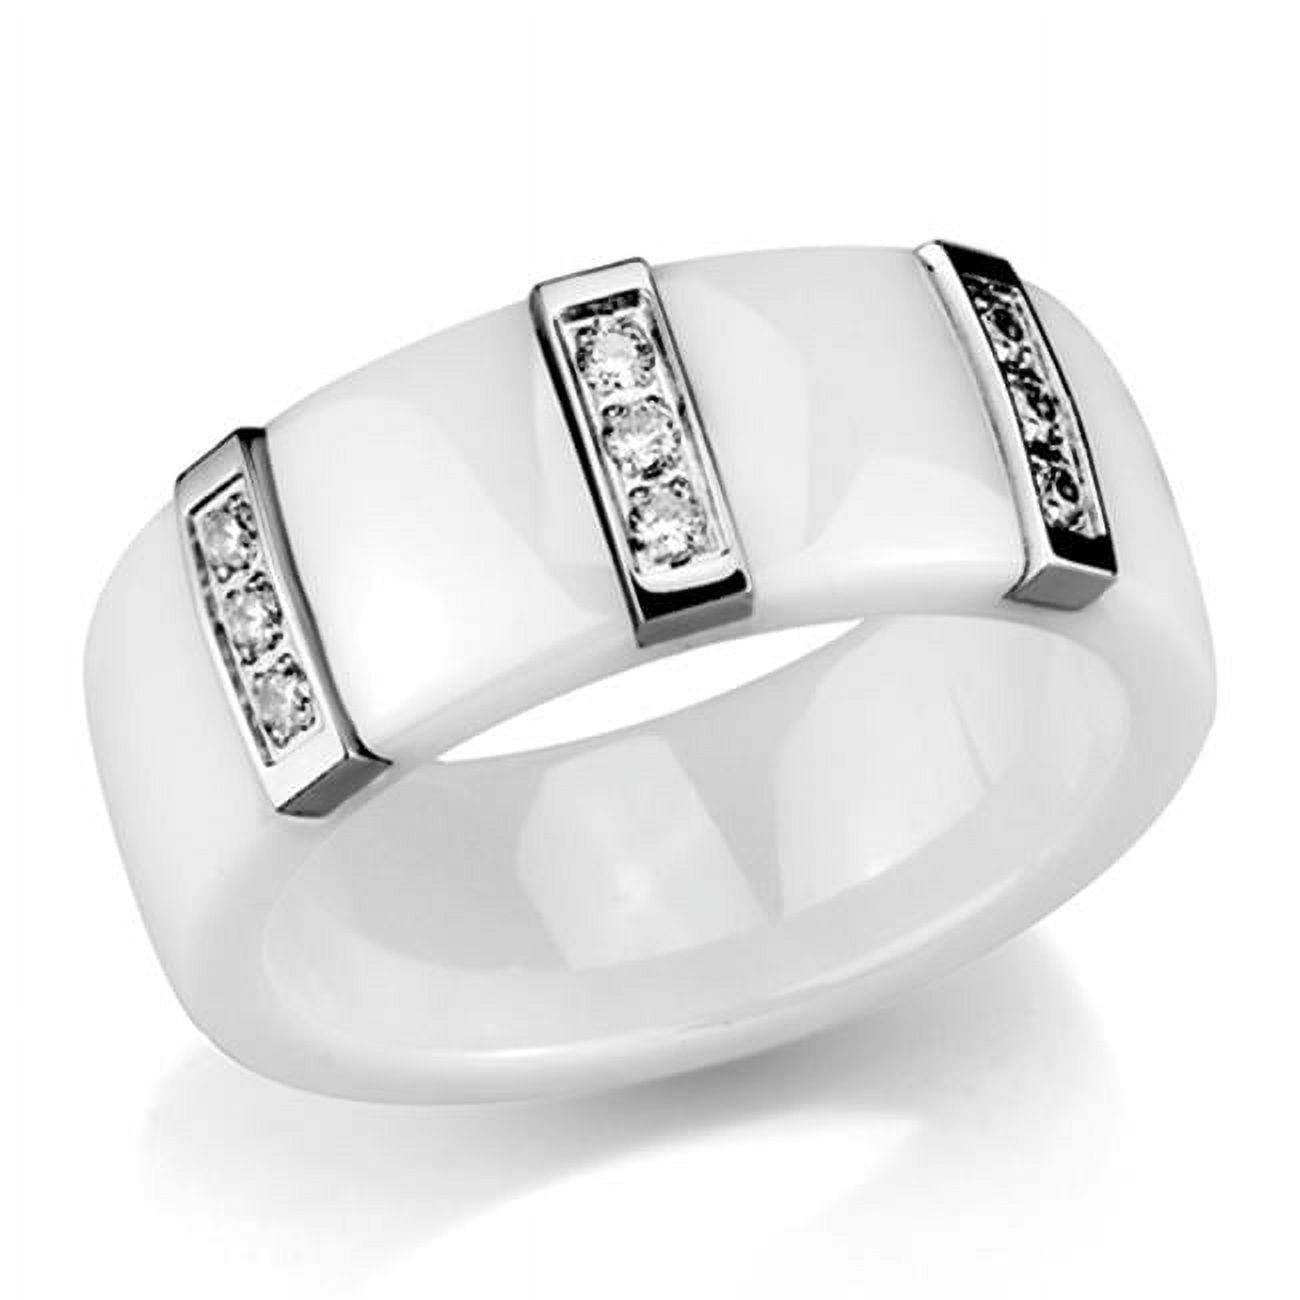 Picture of Alamode 3W957-7 Women High Polished Stainless Steel Ring with Ceramic in White - Size 7